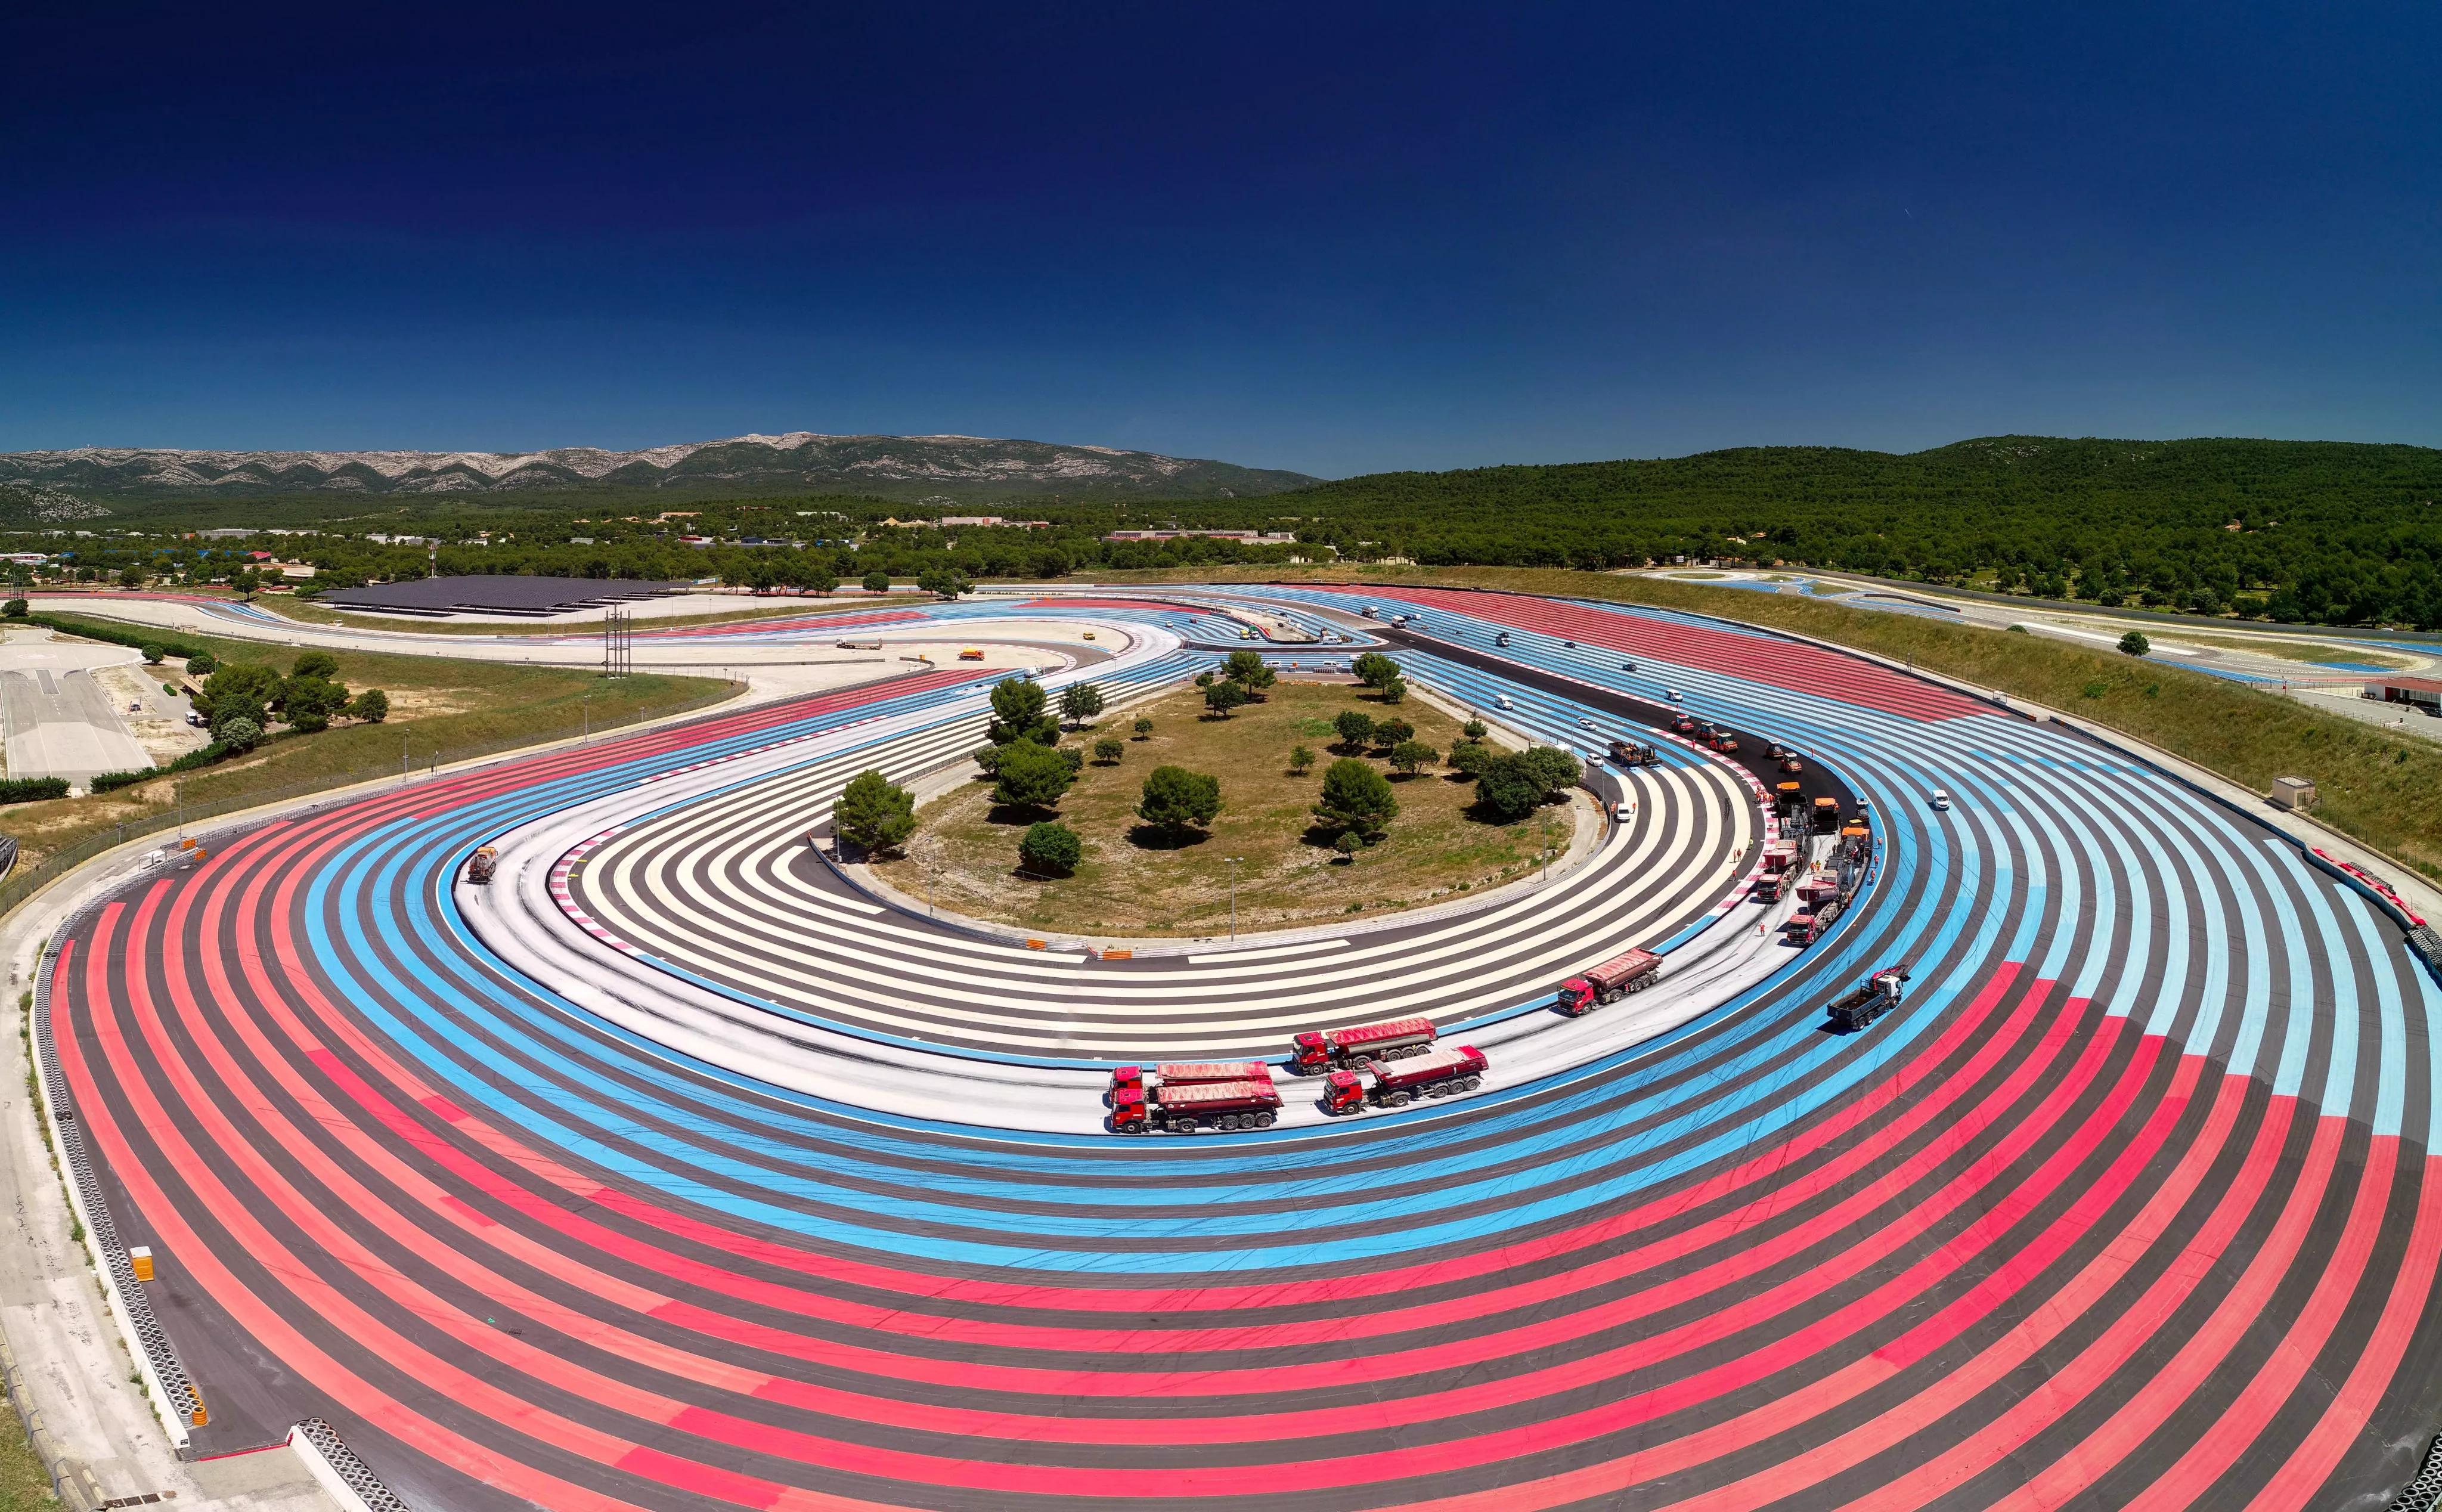 Paul Ricard in France, Europe | Racing - Rated 4.7